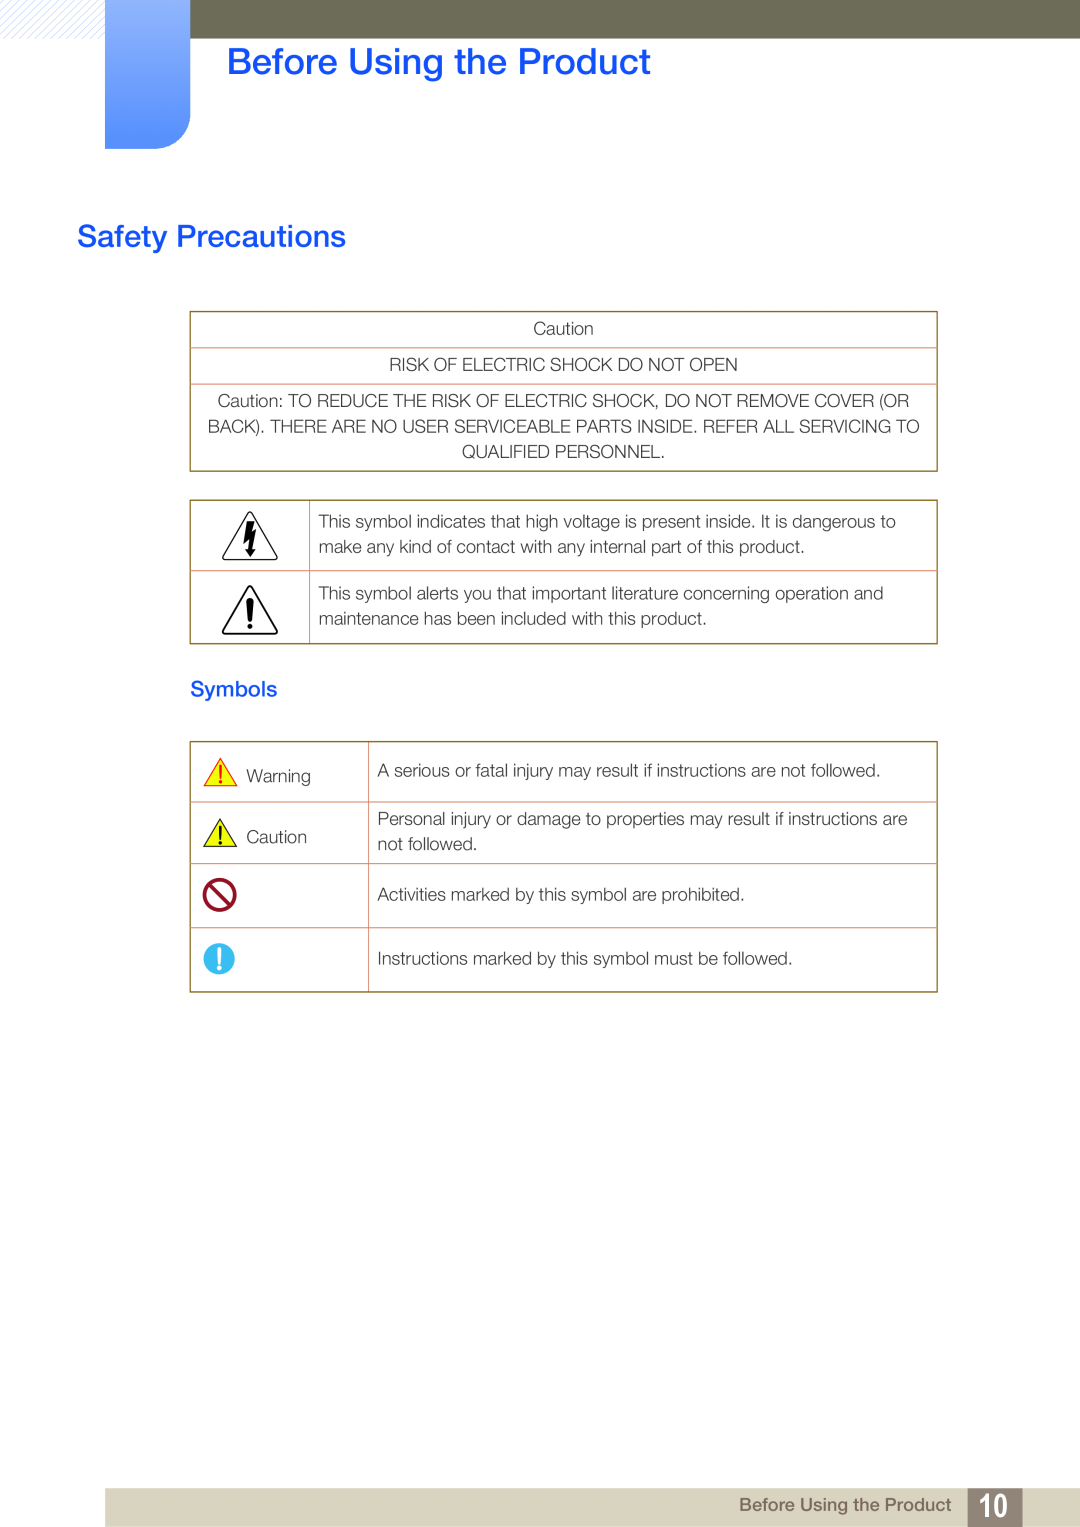 Samsung LS22E65UDSG/EN, LS23E65UDC/EN, LS24E45UDLC/EN, LS24E45KBS/EN Safety Precautions, Symbols, Before Using the Product 